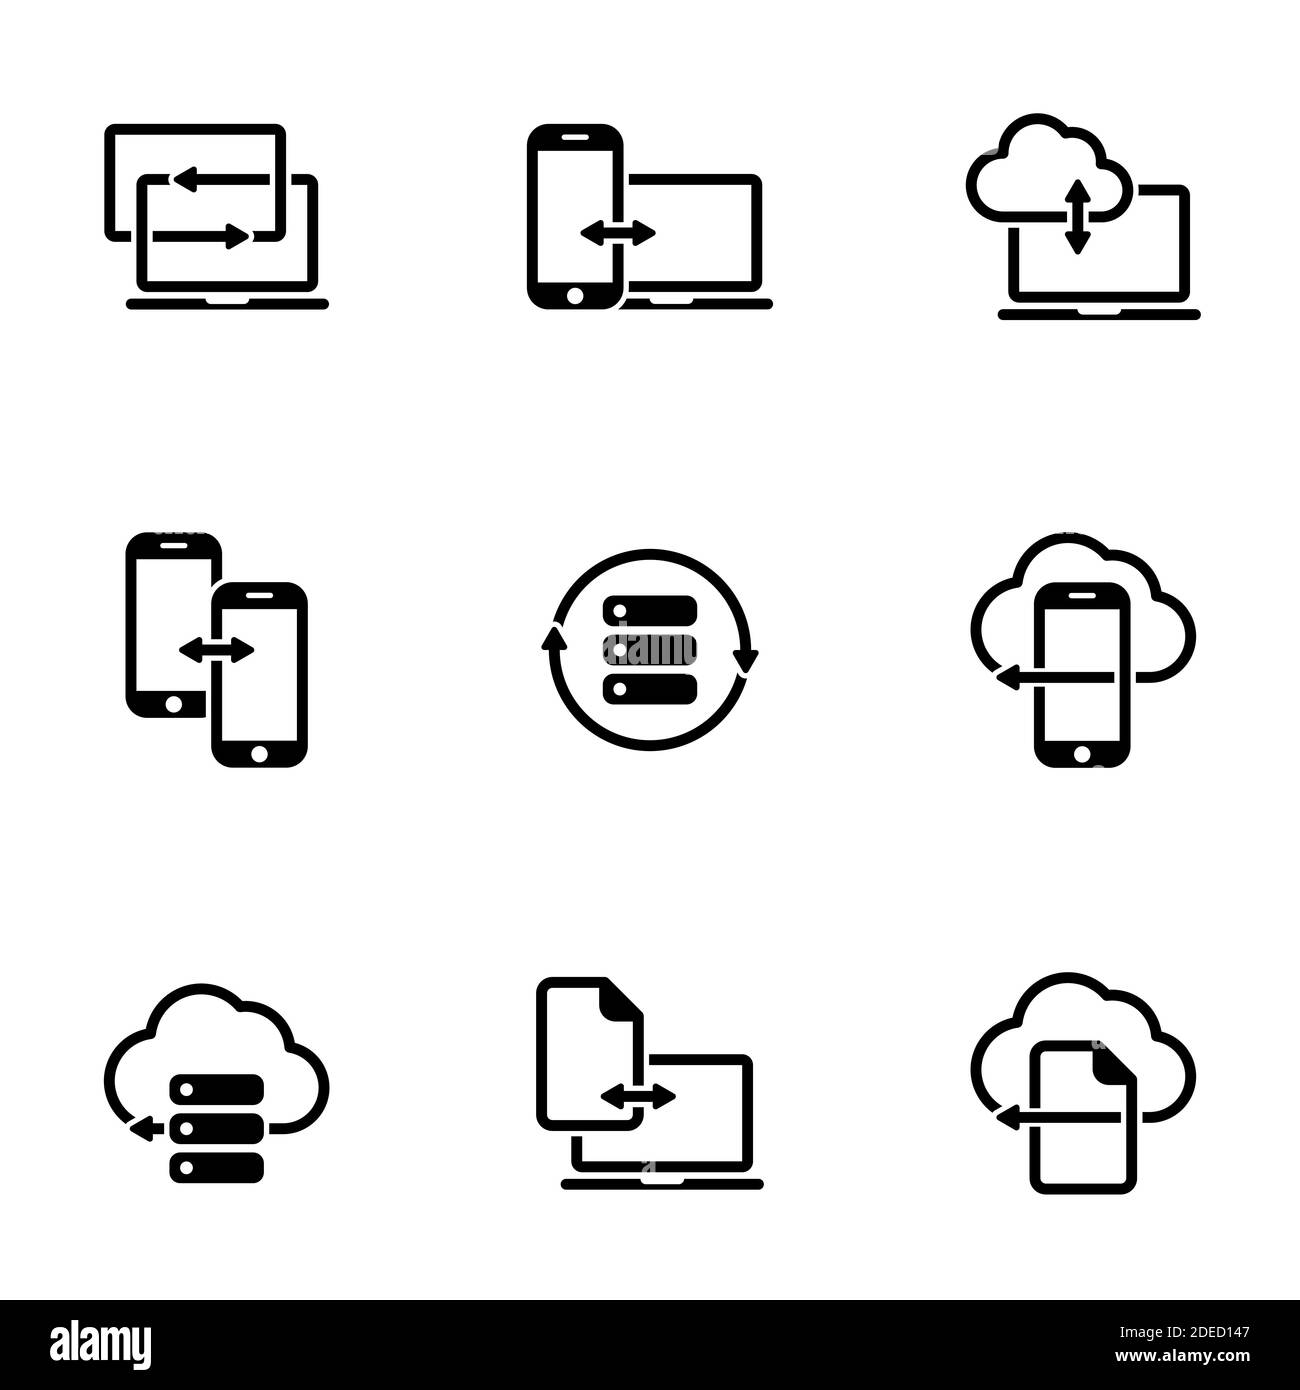 Set of simple icons on a theme Data exchange, vector, design, collection, flat, sign, symbol,element, object, illustration, isolated. White background Stock Vector